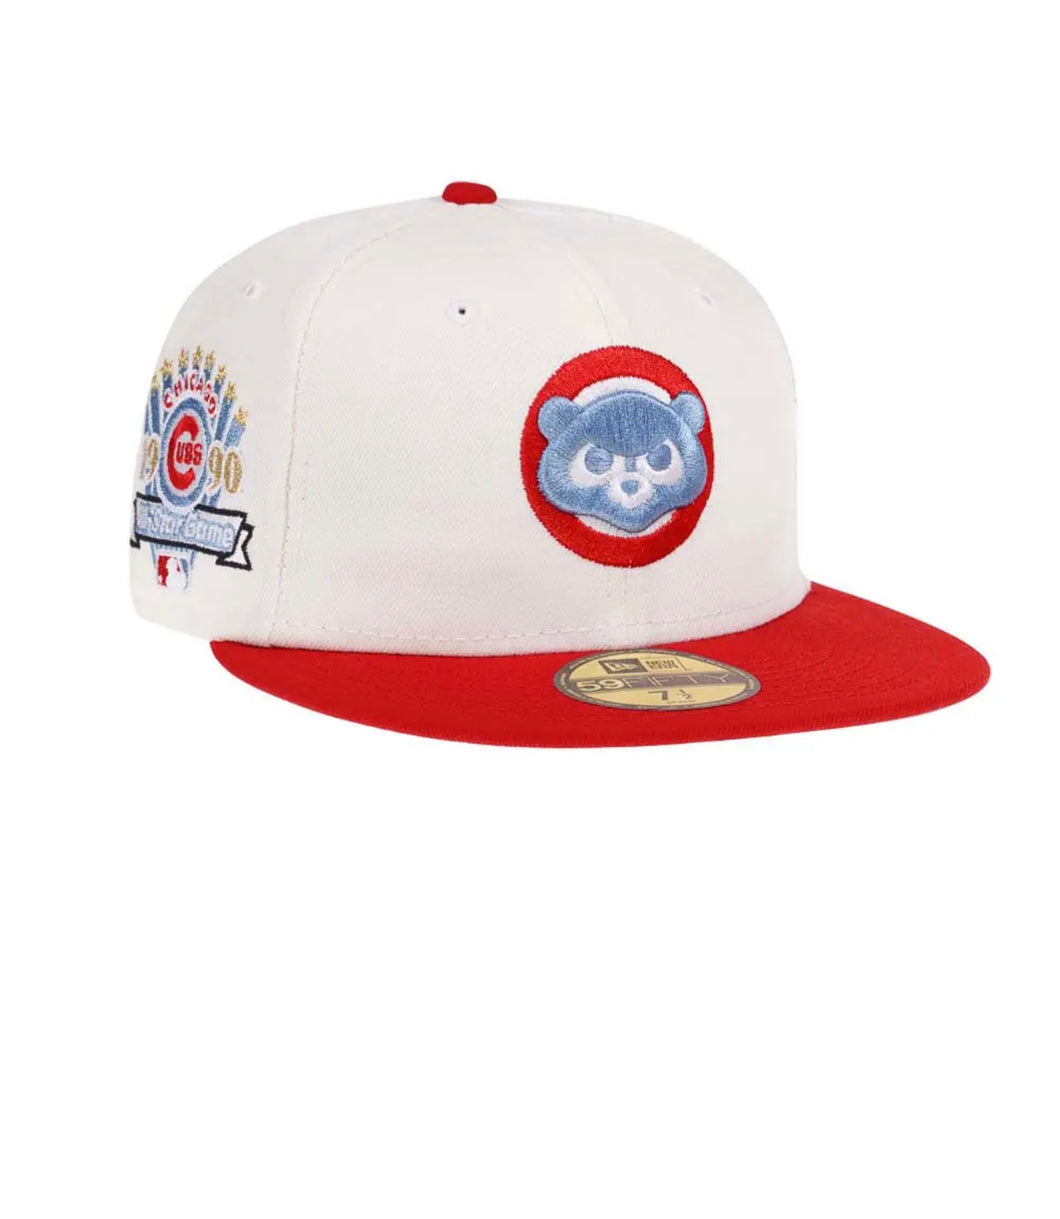 NEW ERA CHICAGO CUBS ALL STAR GAME 1990 CREAM PRIME EDITION 59FIFTY FITTED HAT